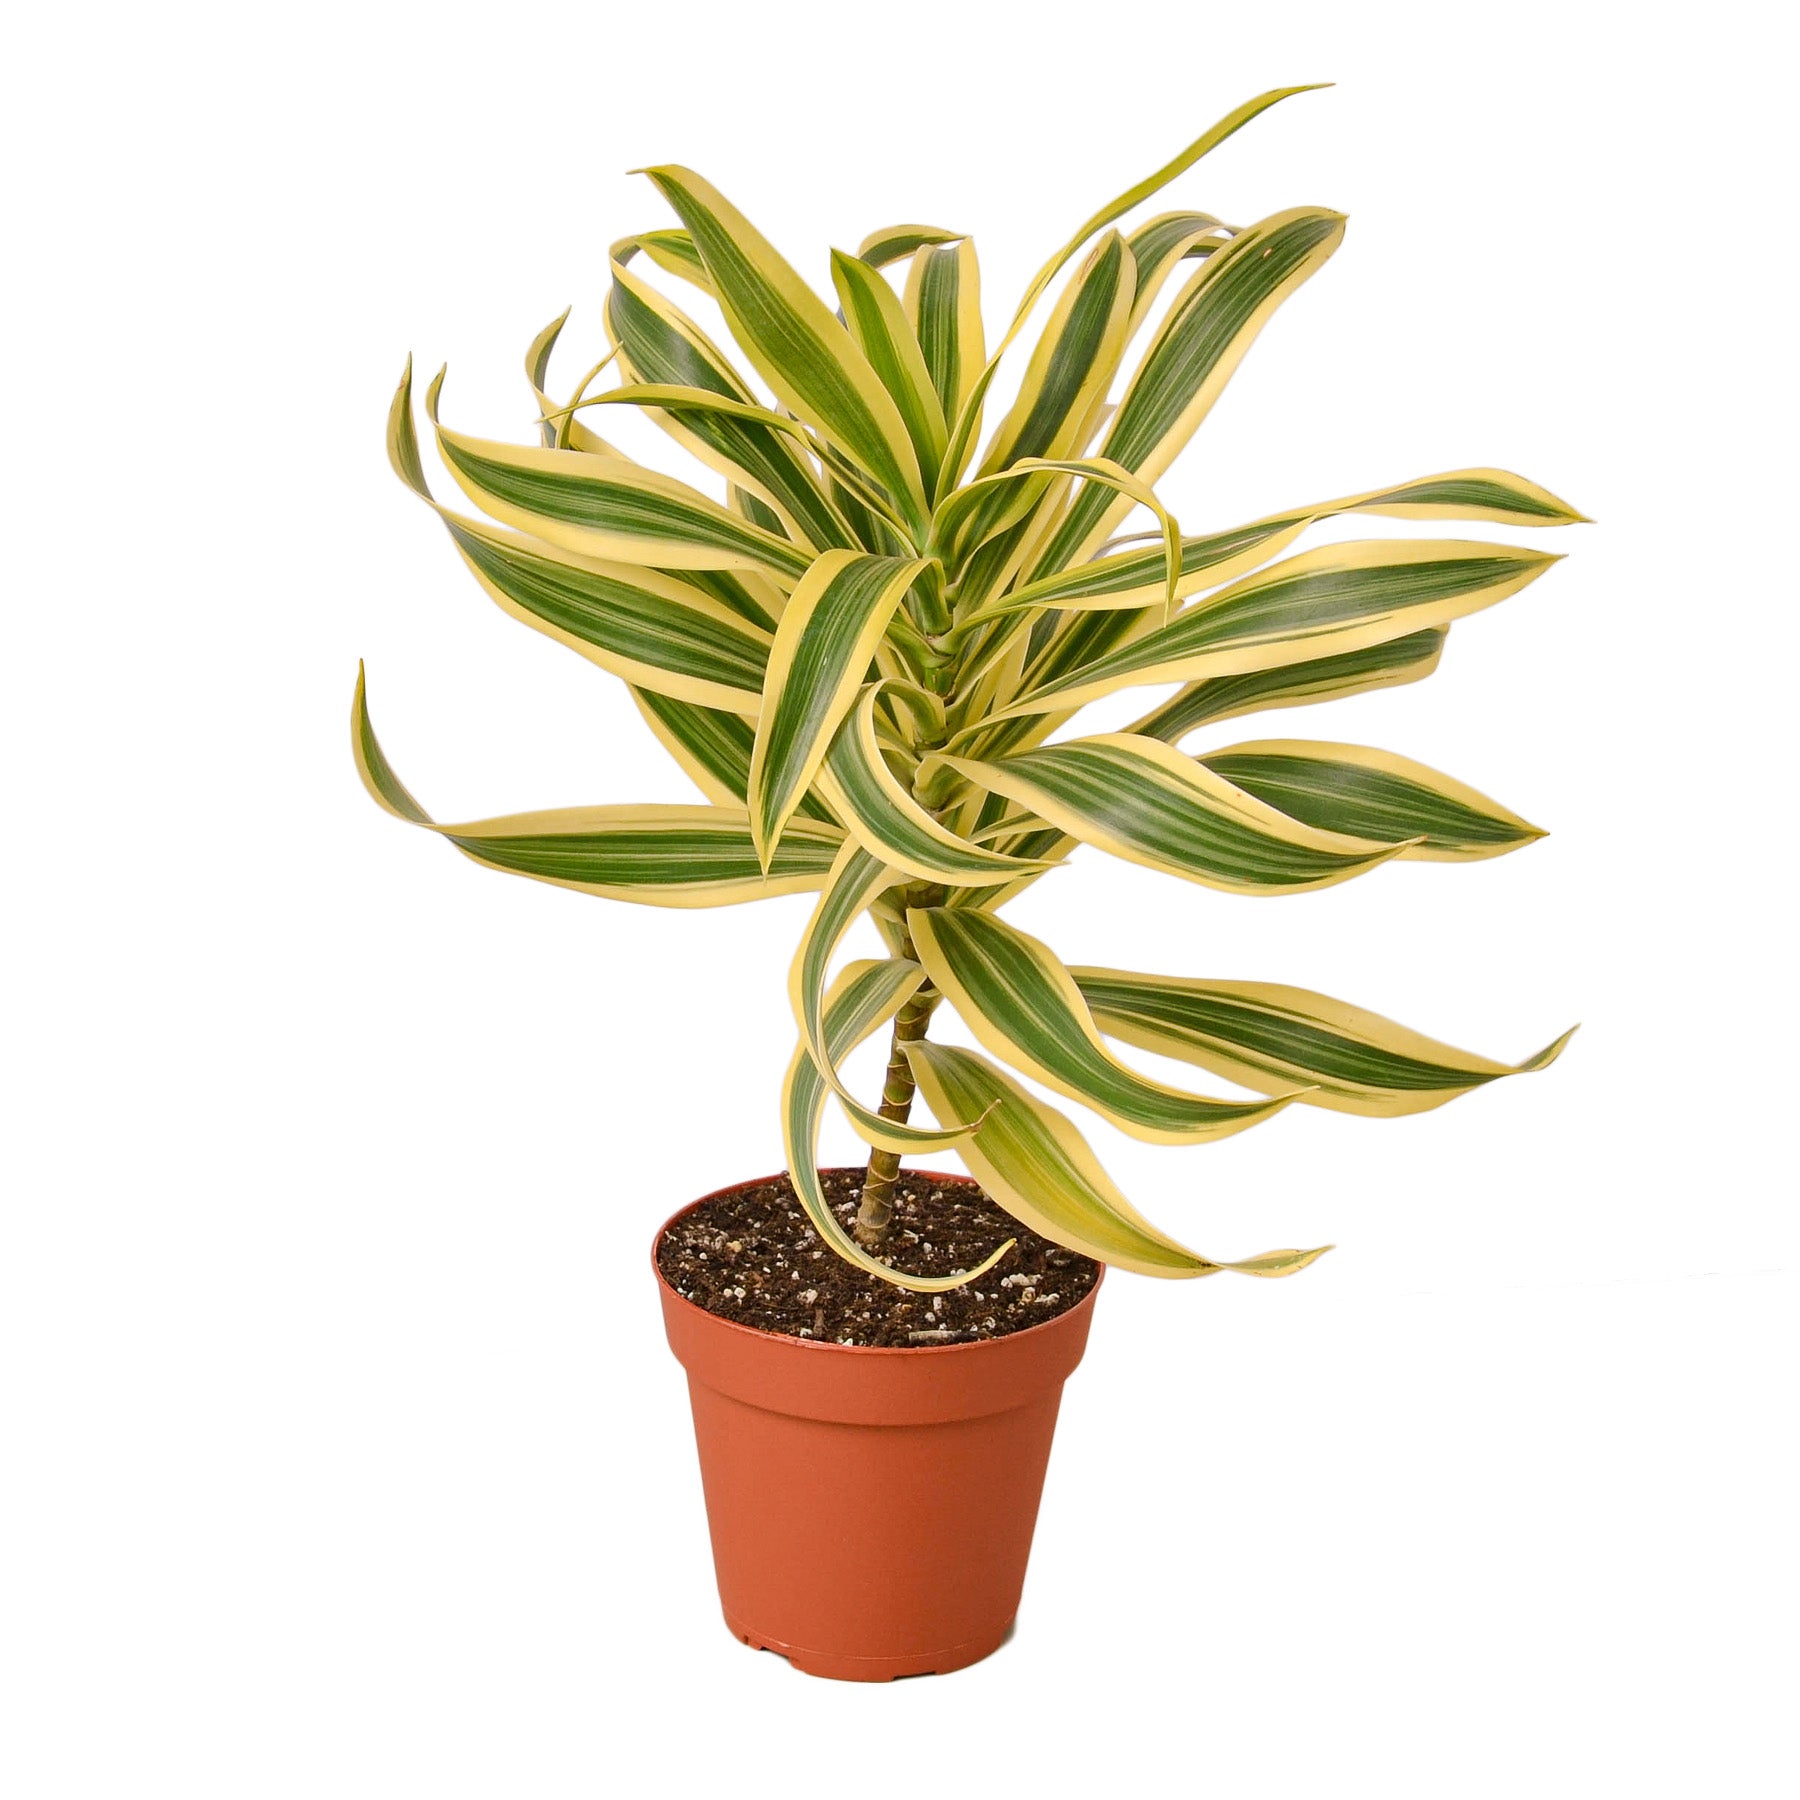 A potted plant with yellow and green stripes available at the best plant nursery near me.